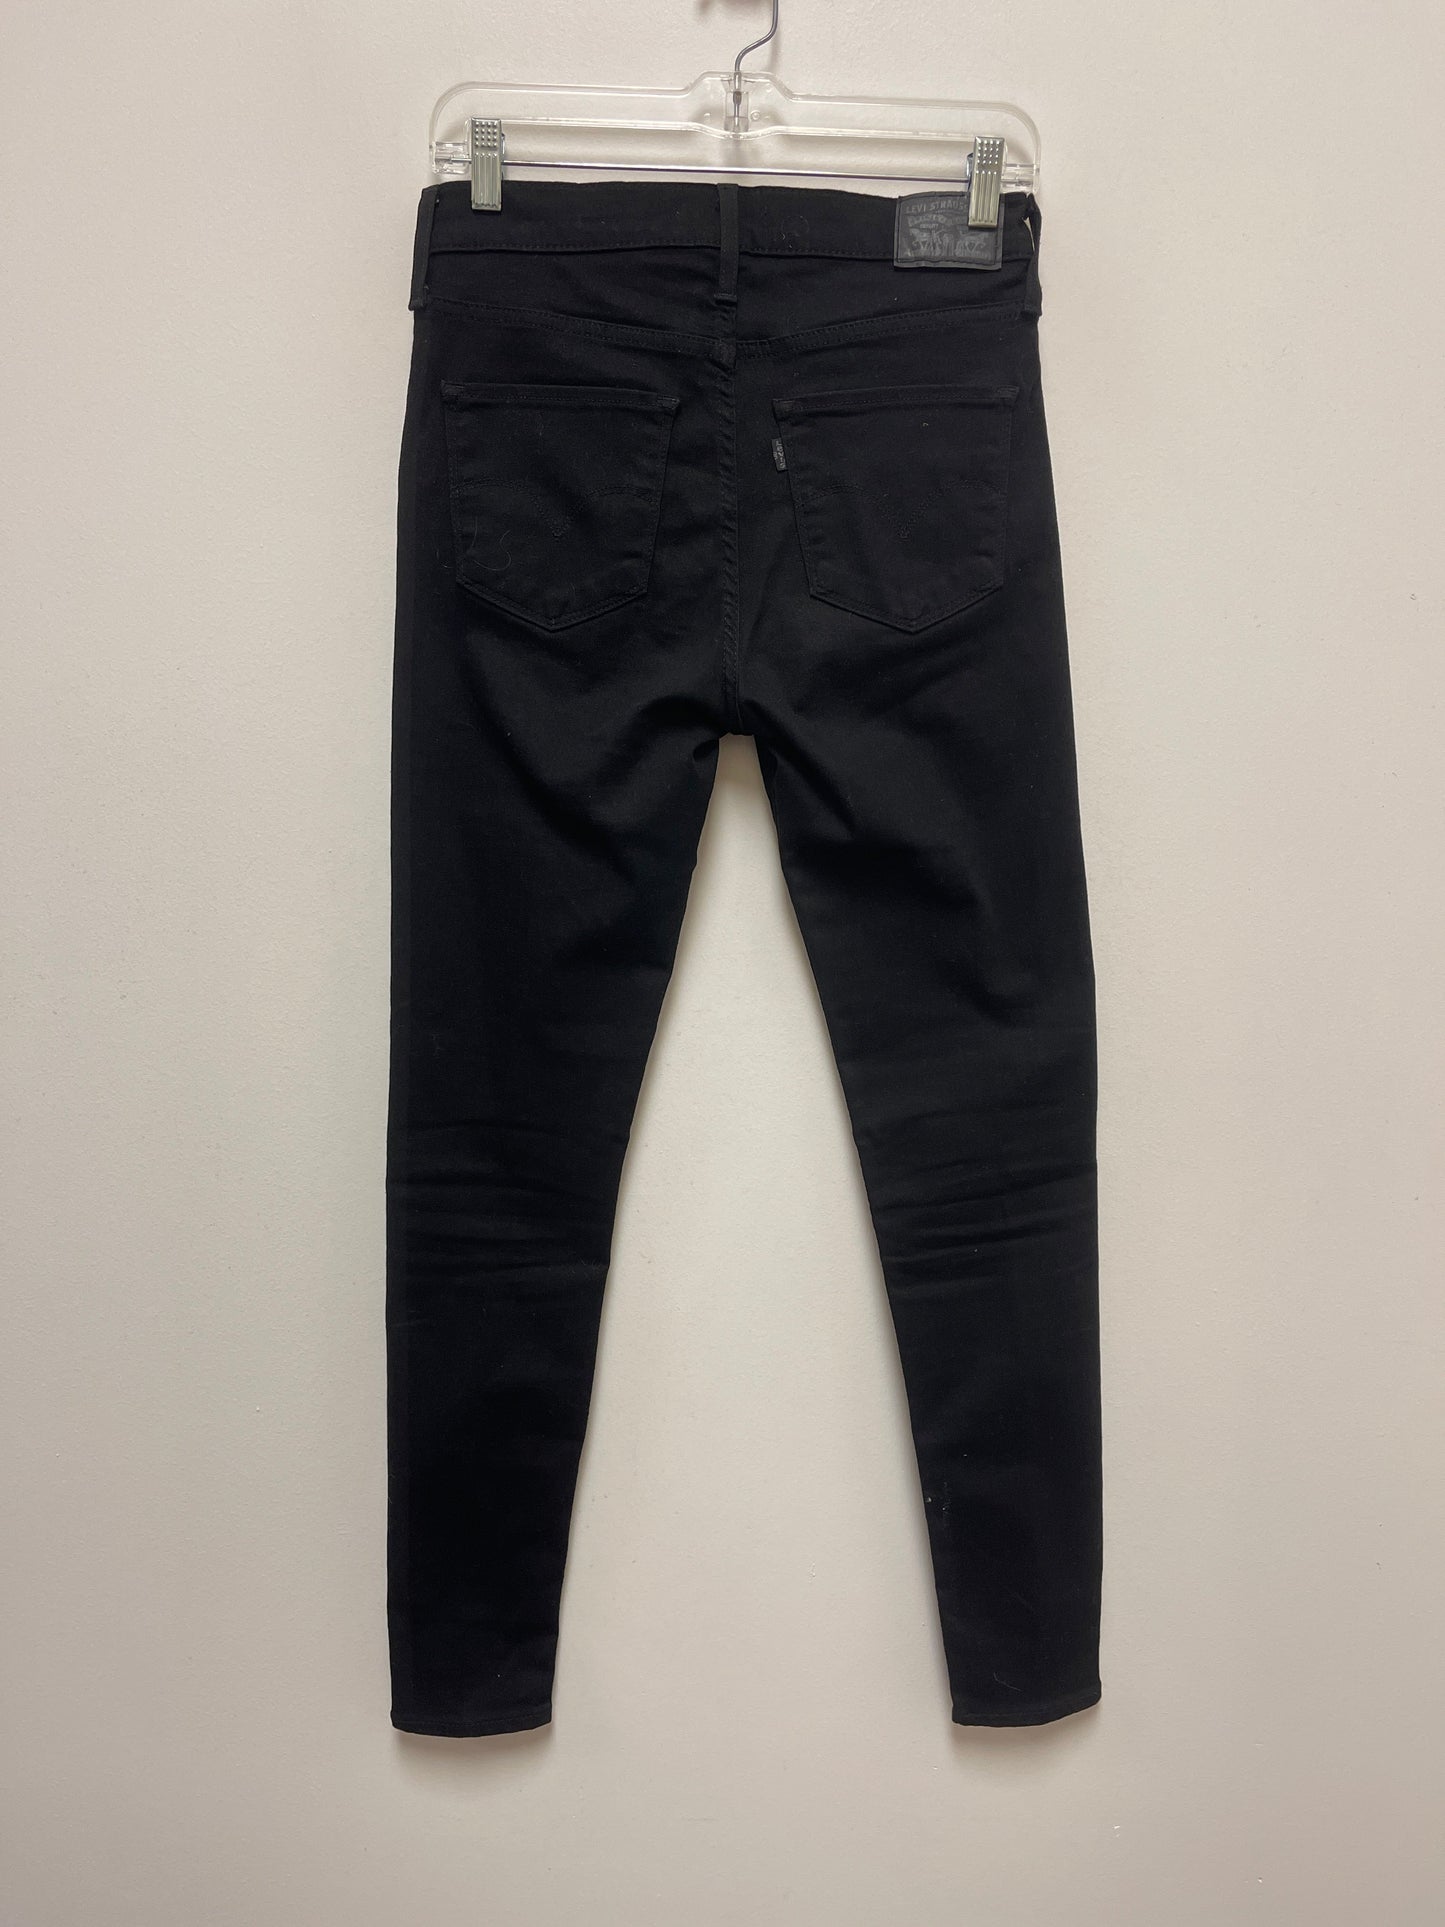 Jeans Skinny By Levis  Size: 6